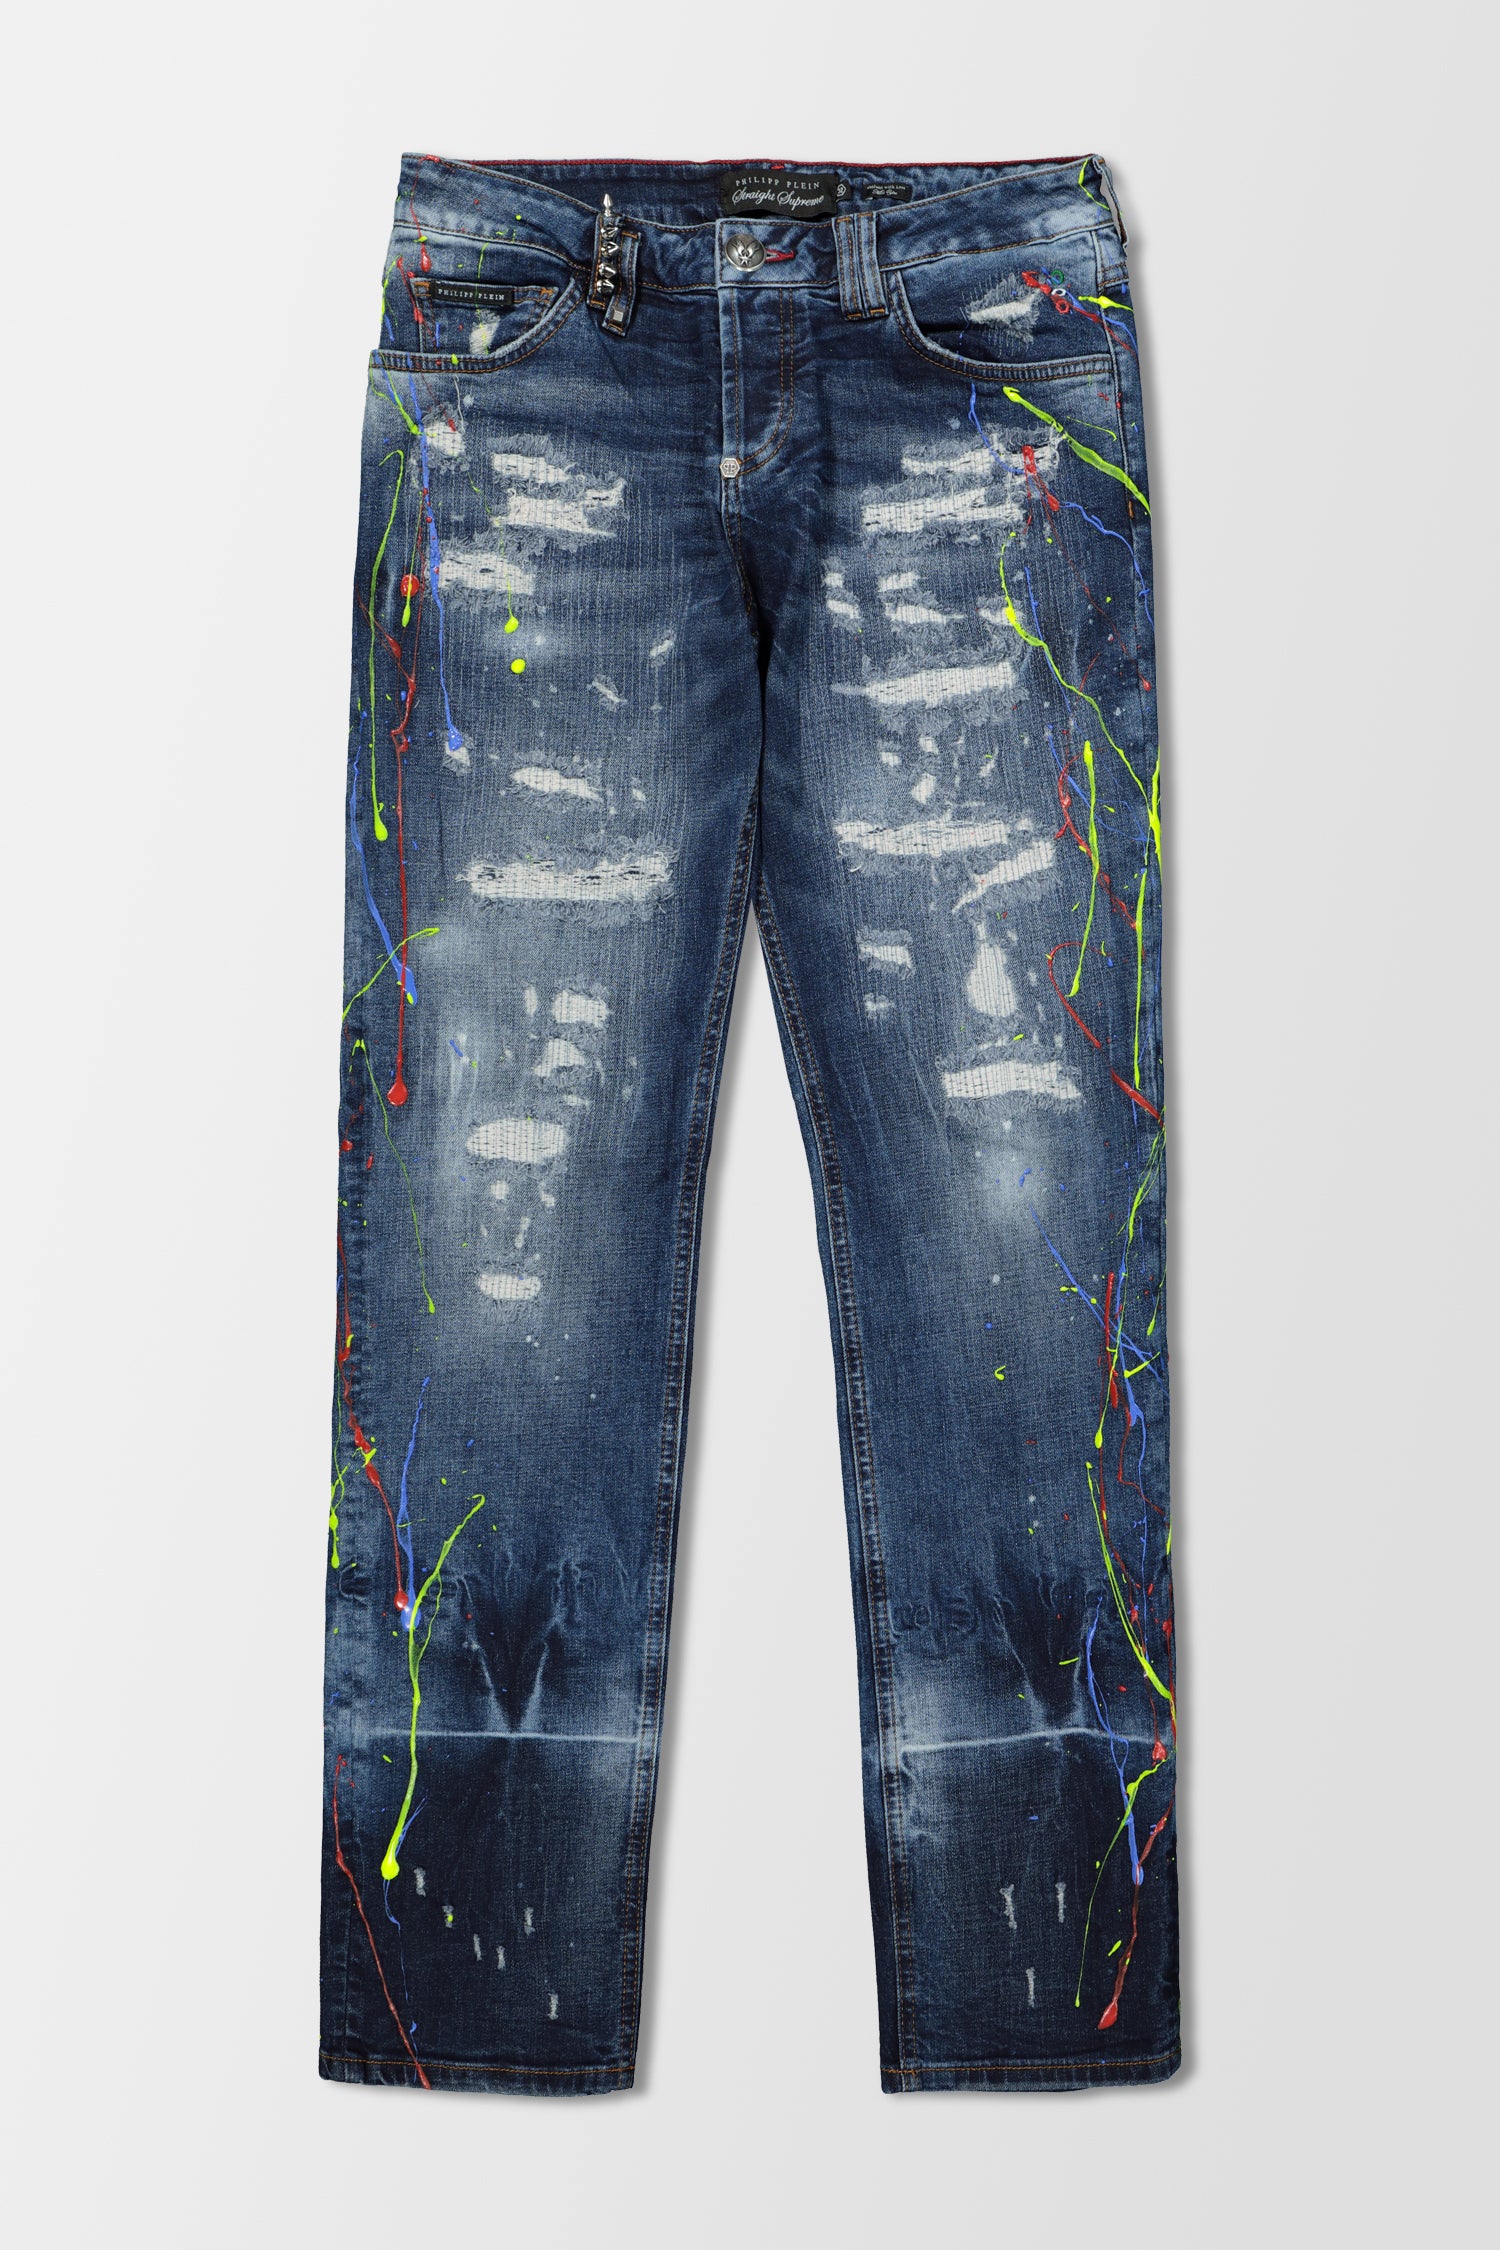 Philipp Plein Miss You Straight Supreme Painted Jeans